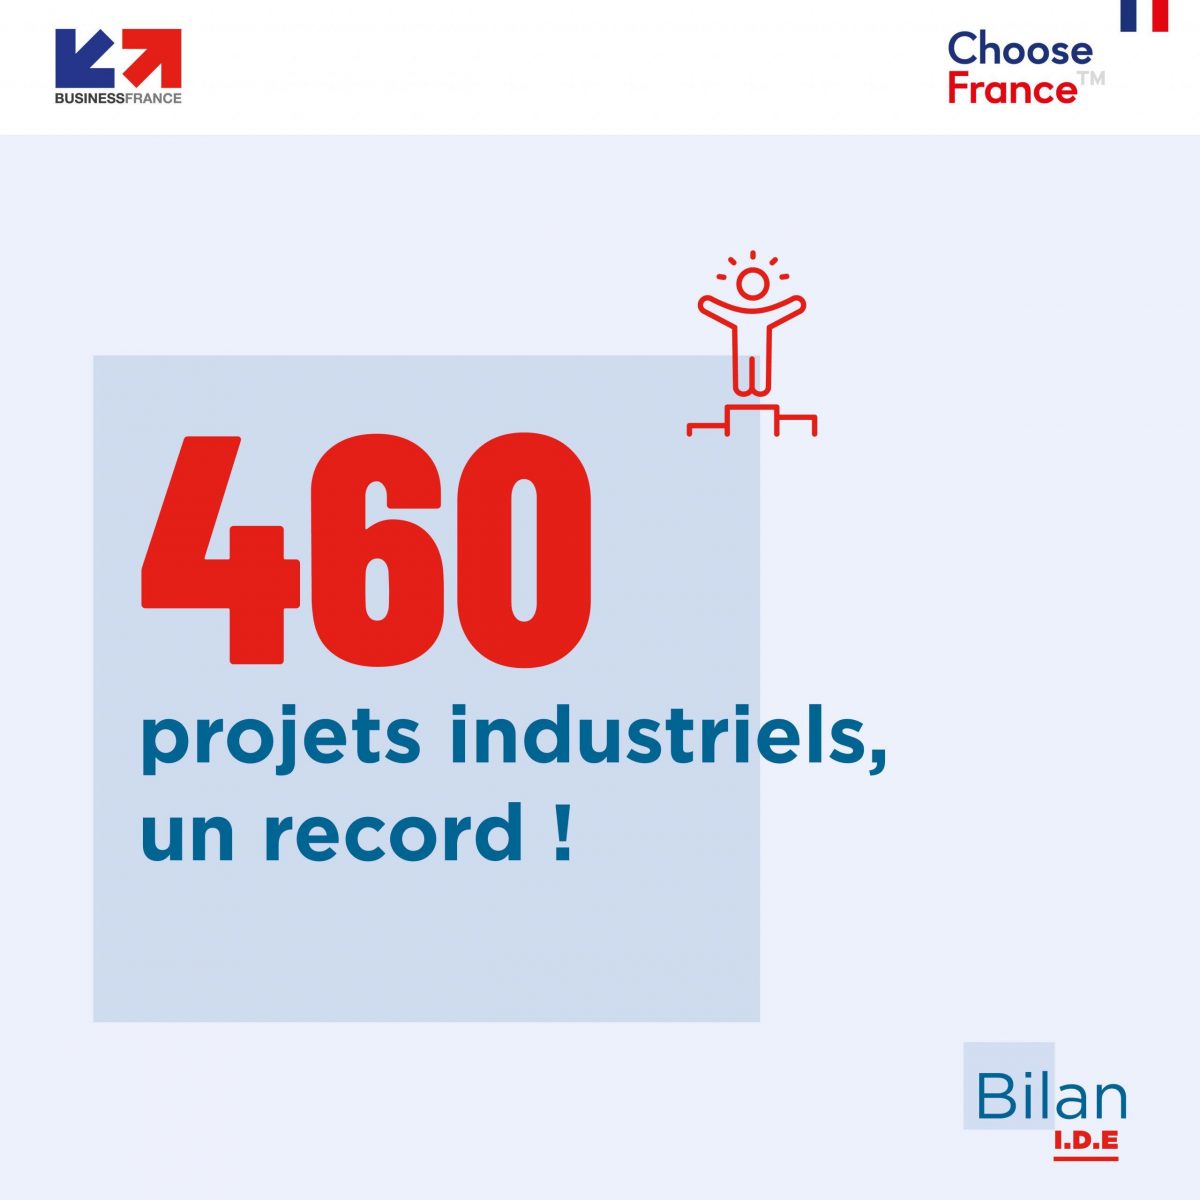 62% increase in production site projects in 2021 in France